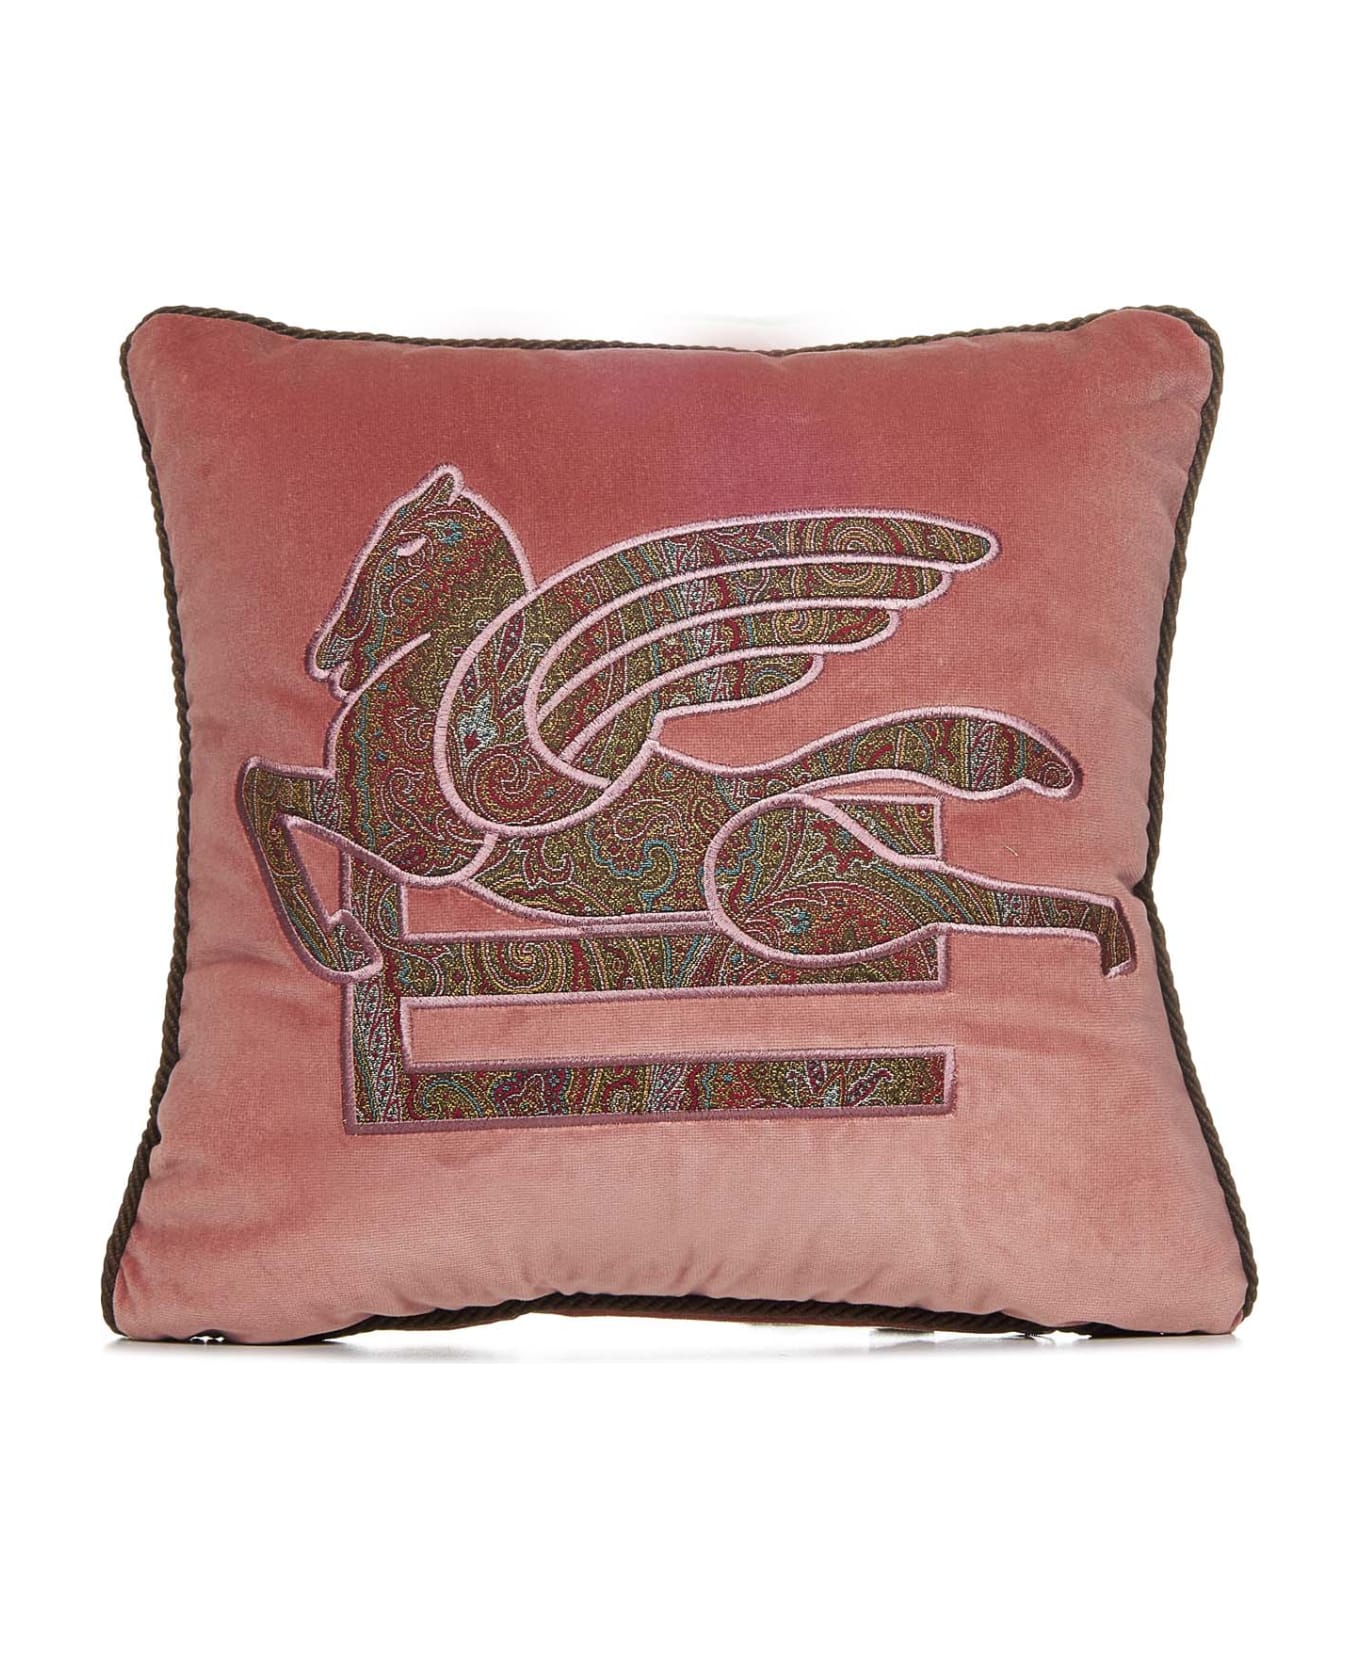 Etro Home New Somerset Pillow - Pink